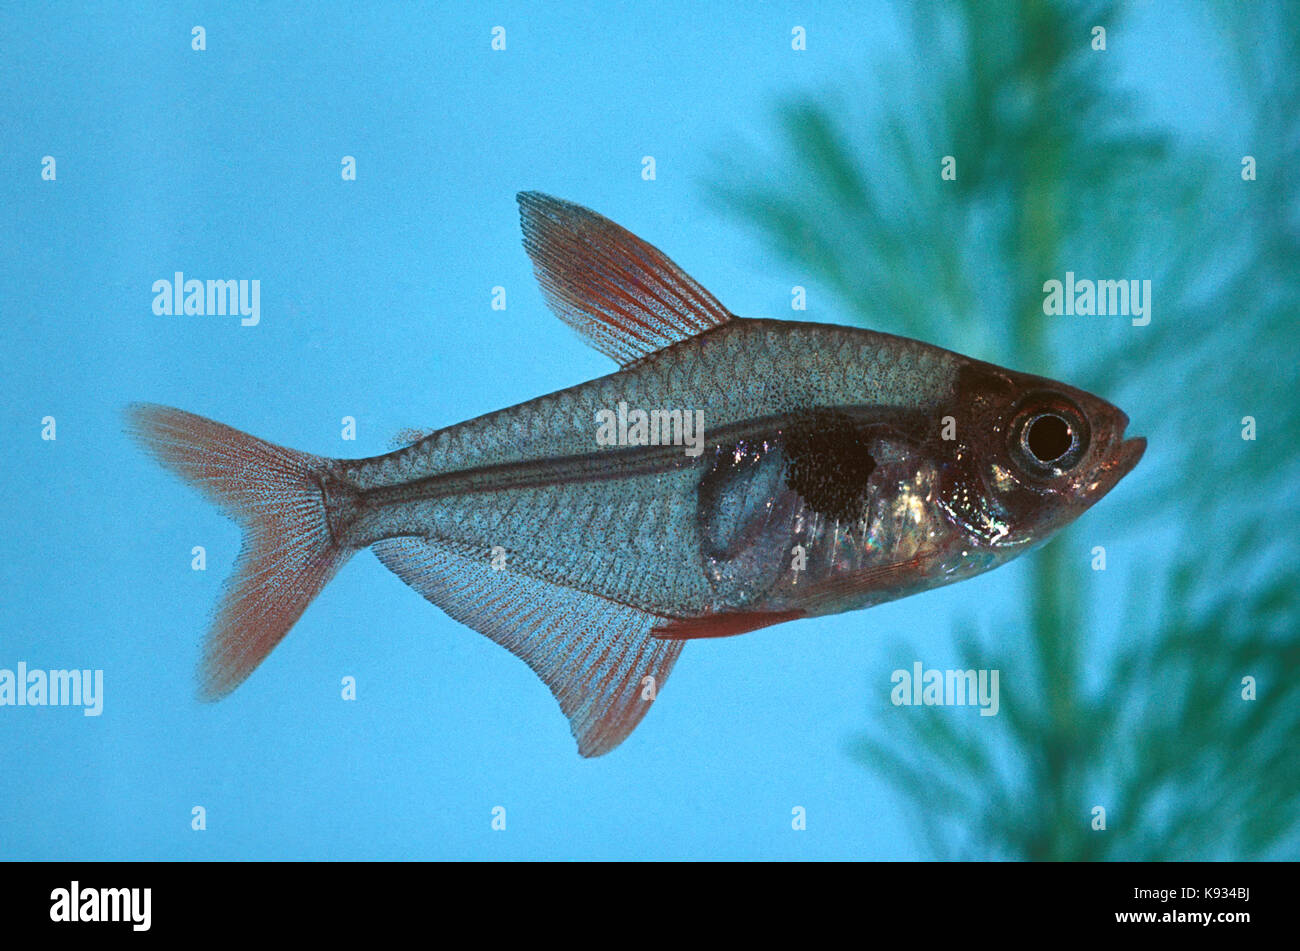 Serpae Tetra Hyphessobrycon Eques Tropical Freshwater Fish From Stock Photo Alamy,Lychee Fruit Taste